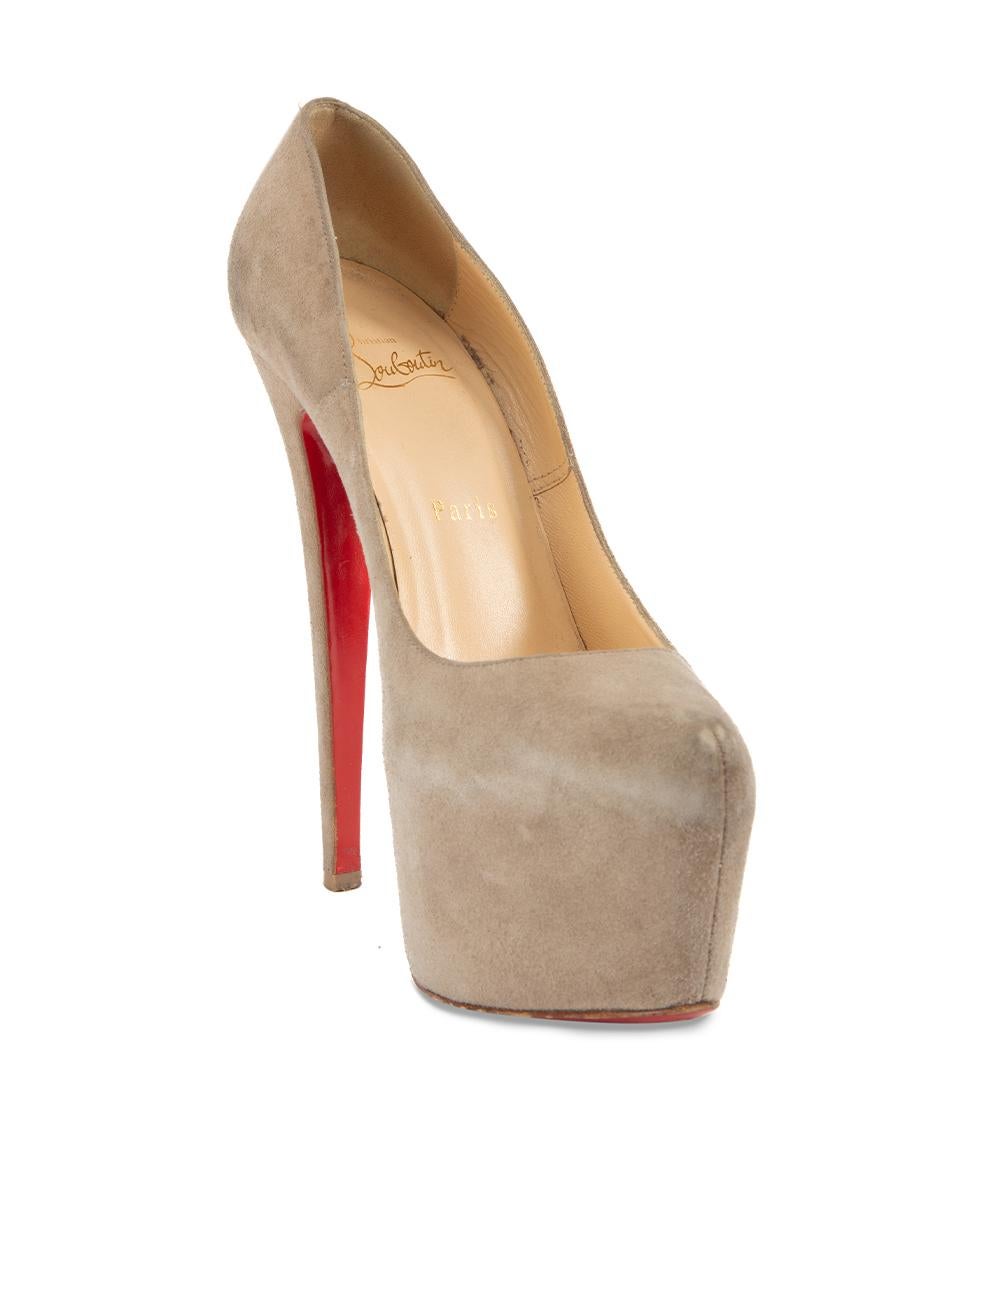 CONDITION is Good. Minor wear to heels is evident. Light wear to the suede exterior which is scuffed and discoloured in some areas. There is also wear to the outsole on this used Christian Louboutin designer resale item. Details Beige Suede Platform